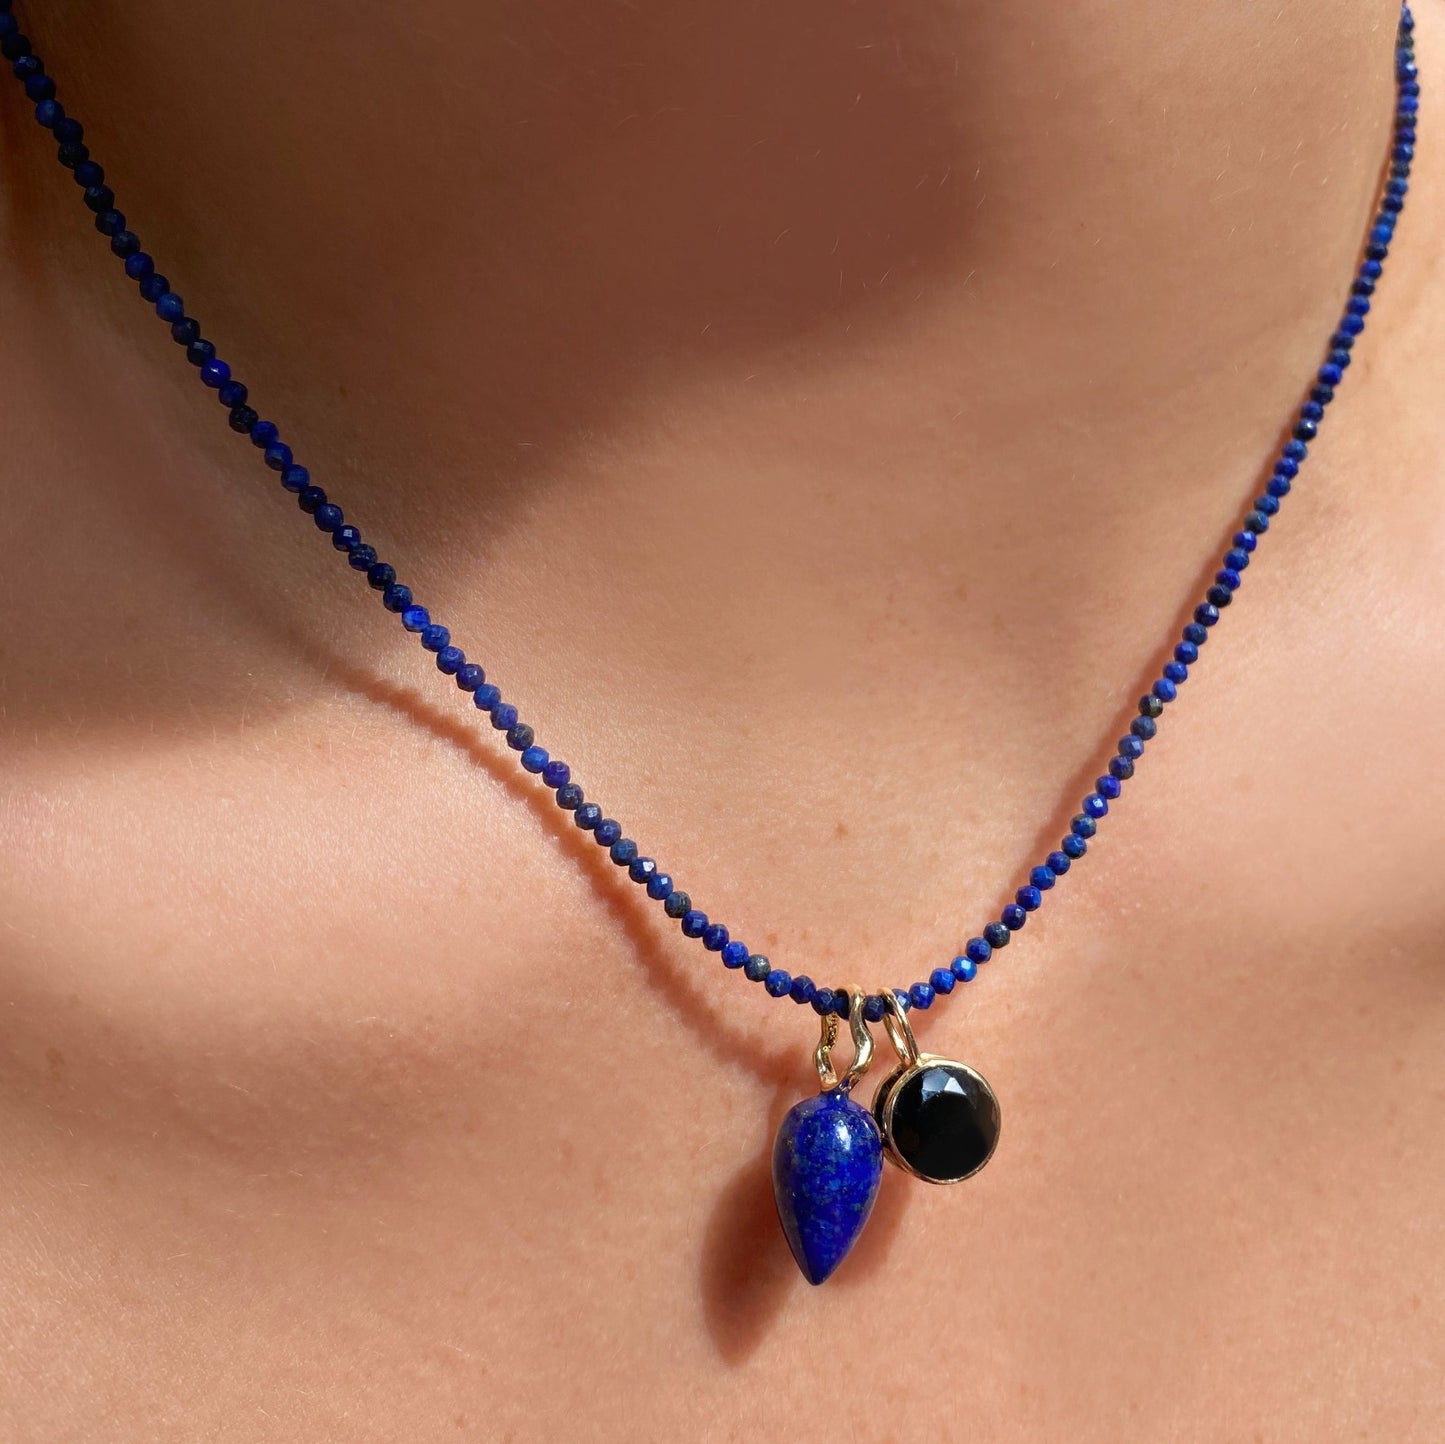 Lapis acorn drop charm. Styled on a neck with a rounded solitaire charm hanging from a beaded necklace.